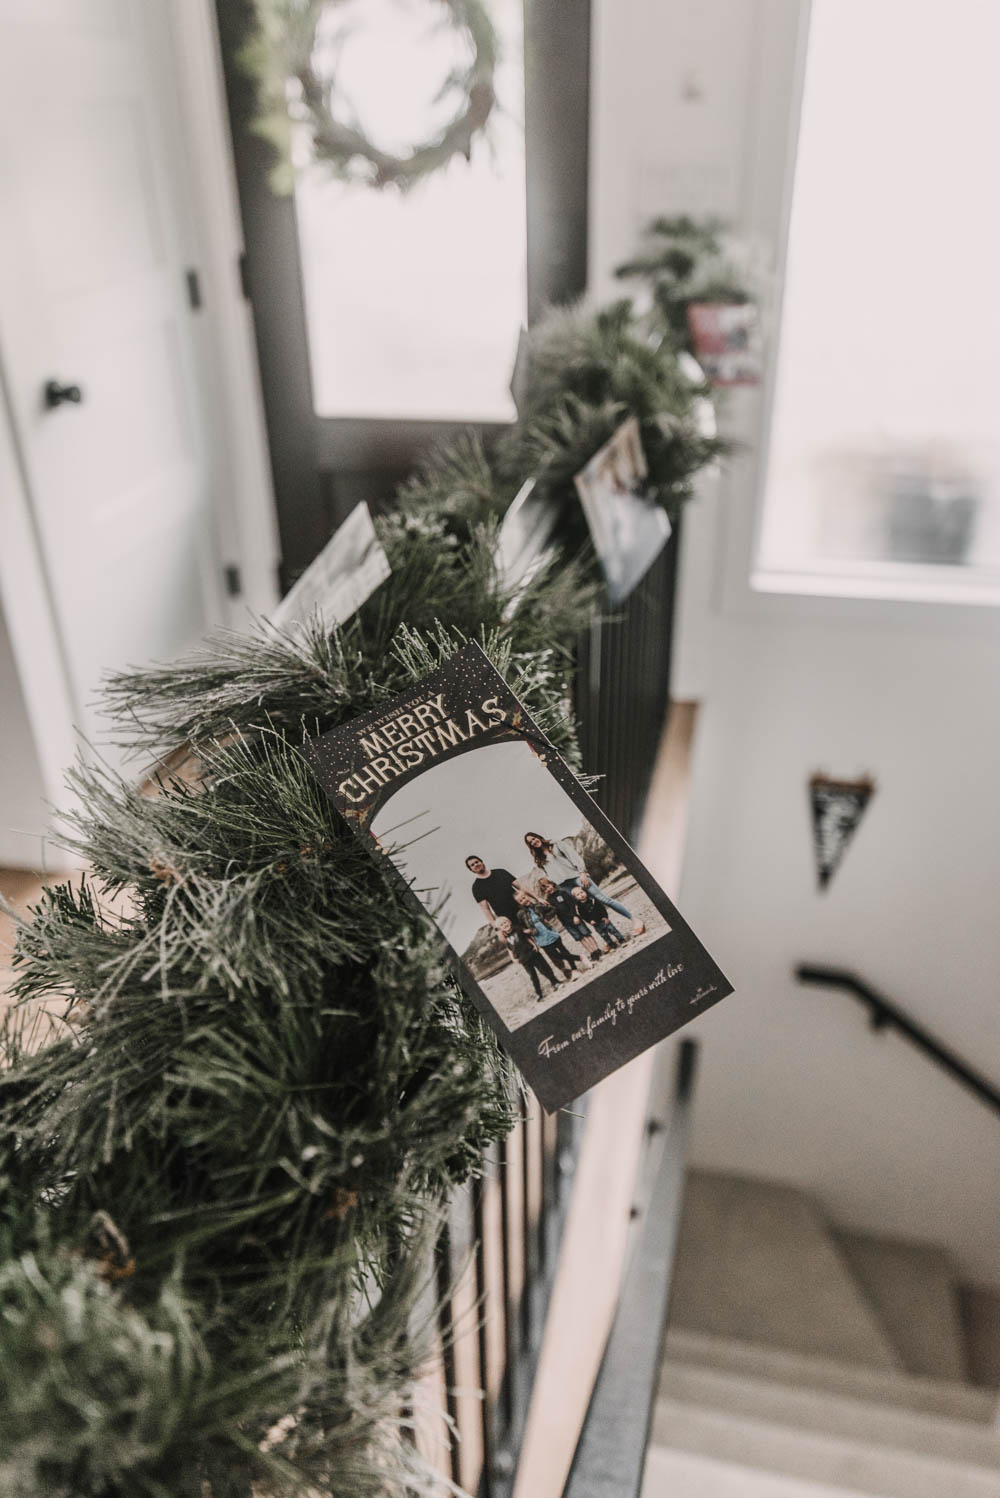 Holiday cards are exciting to receive, but once you’ve read them… what do you do with them? I’m sharing 5 simple ways to display them to enjoy them all season long, without buying anything new!